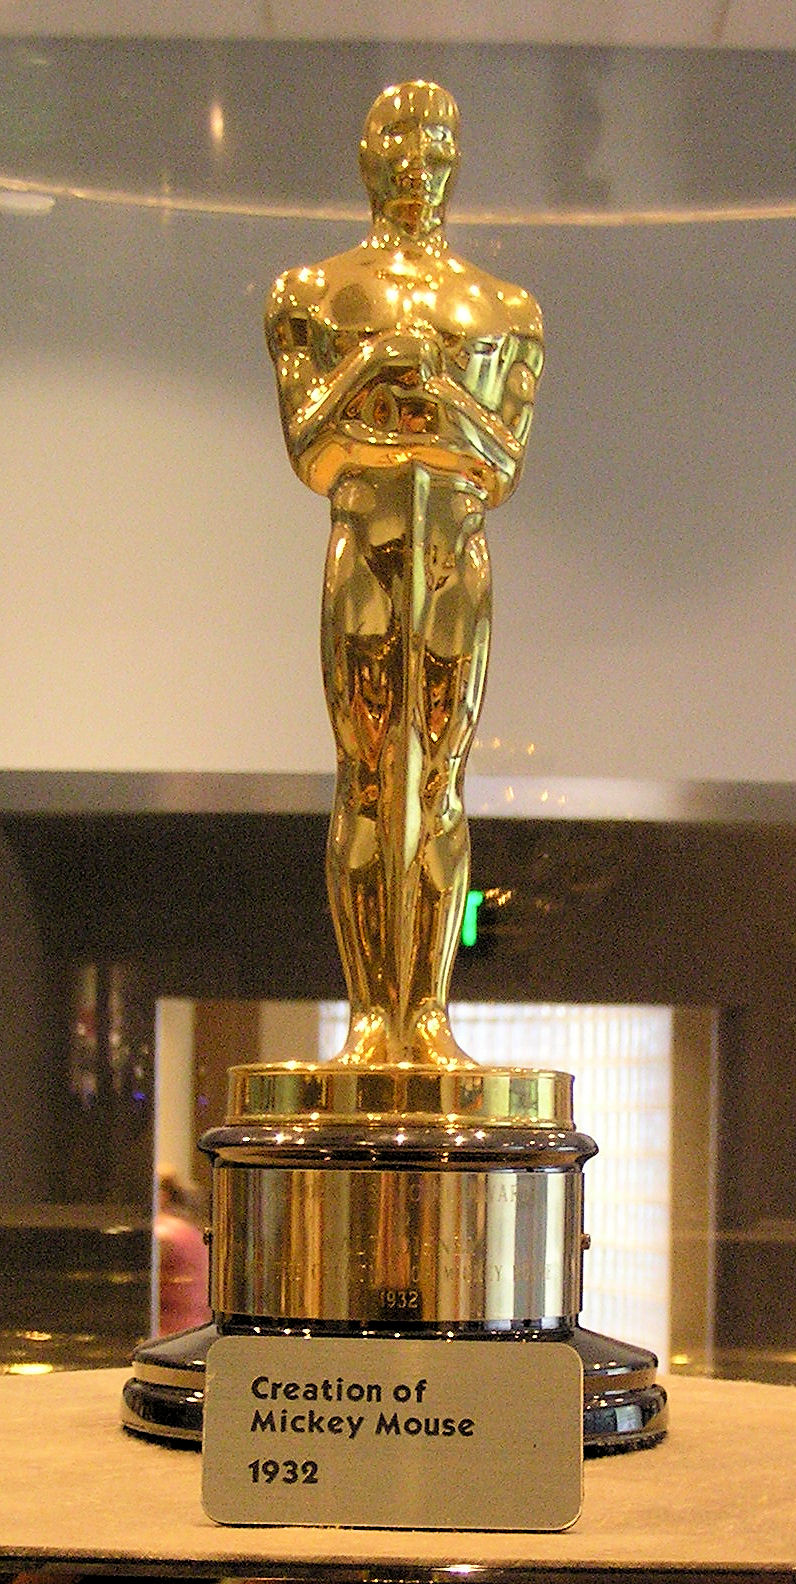 A replica of the Oscar to award the creation of Mickey Mouse in The Magic of Disney Animation at Disney's MGM Studios.